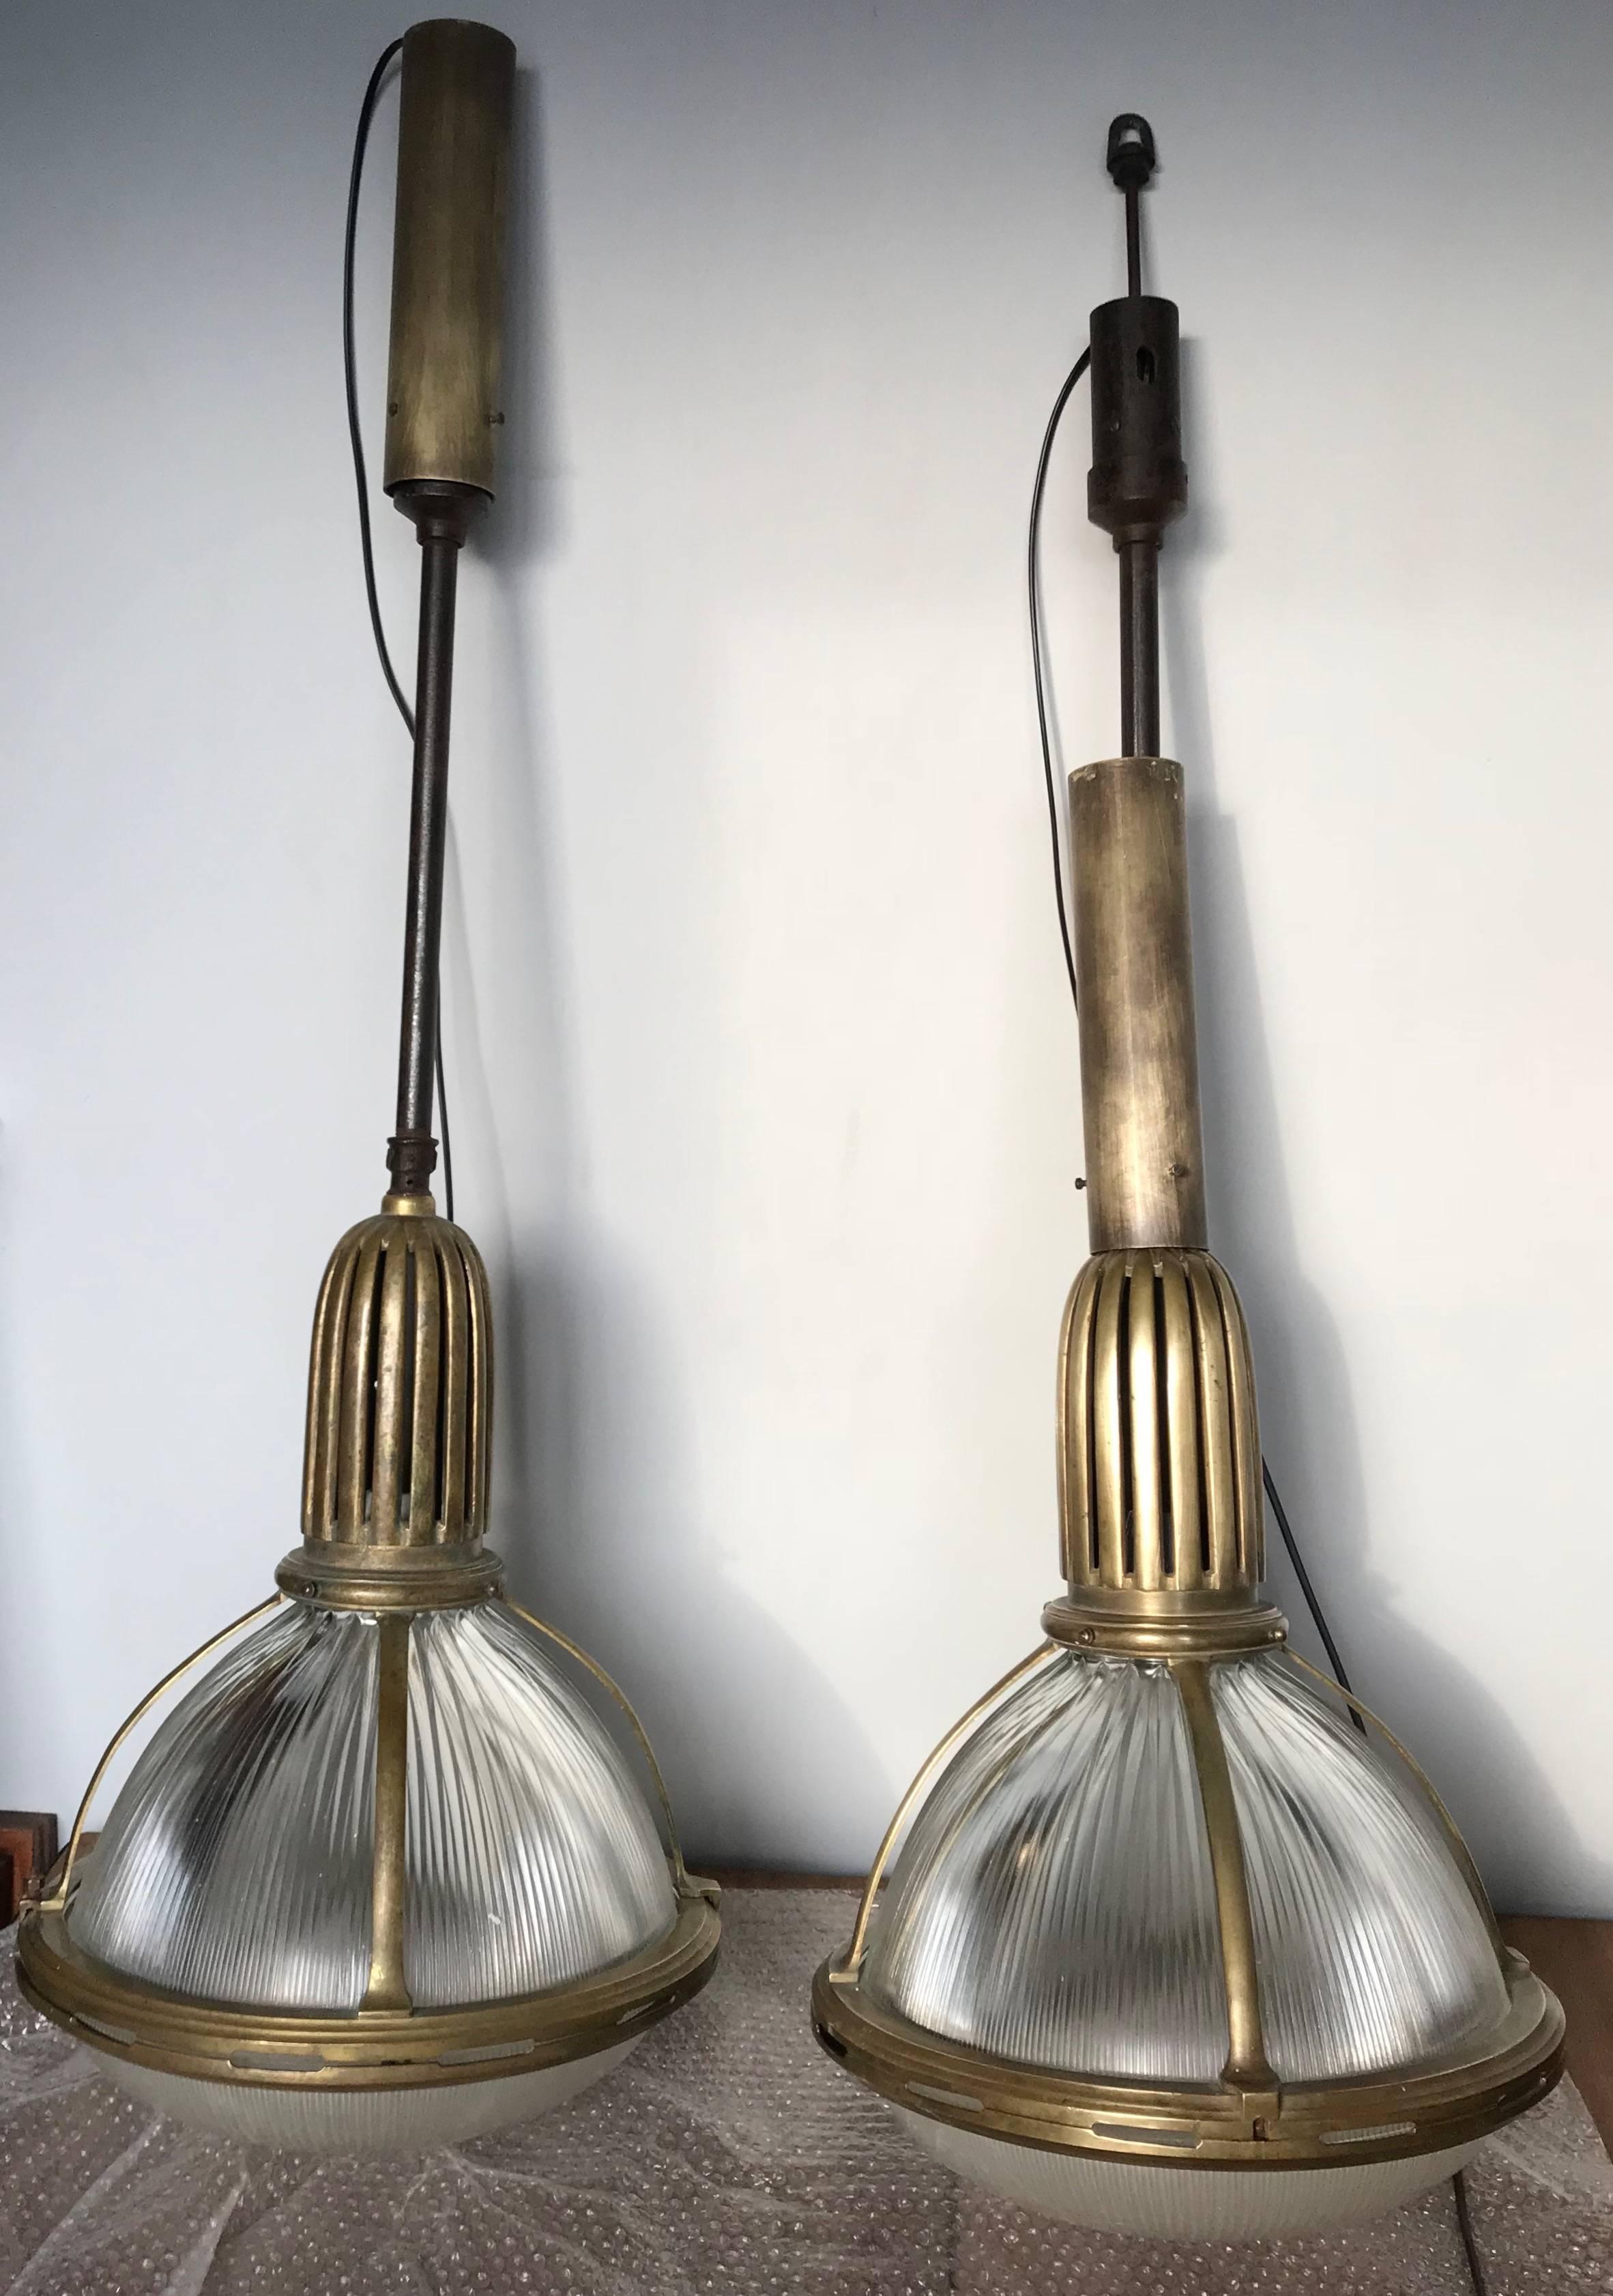 Large size and great shape, Holophane marked pendants.

Photo's 11 till 14 are with matching pendant, item number listing  LU2341310033531. 

The former owners told us that this large pair of stunning Holophane pendants was salvaged from a hotel in